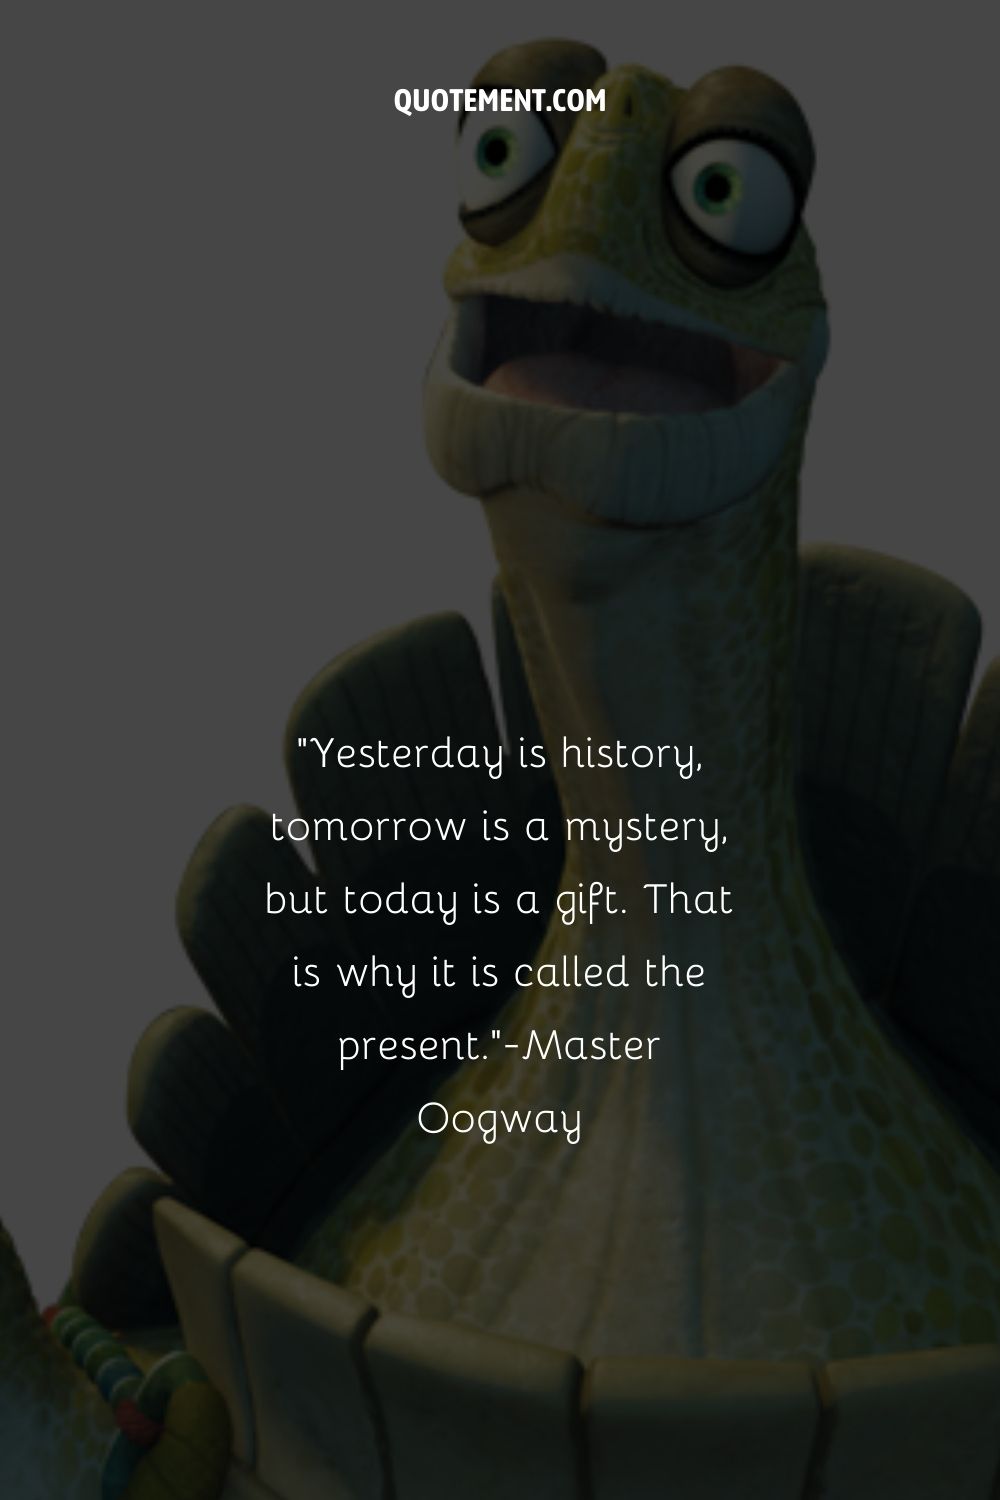 Inspirational Master Oogway quote.
